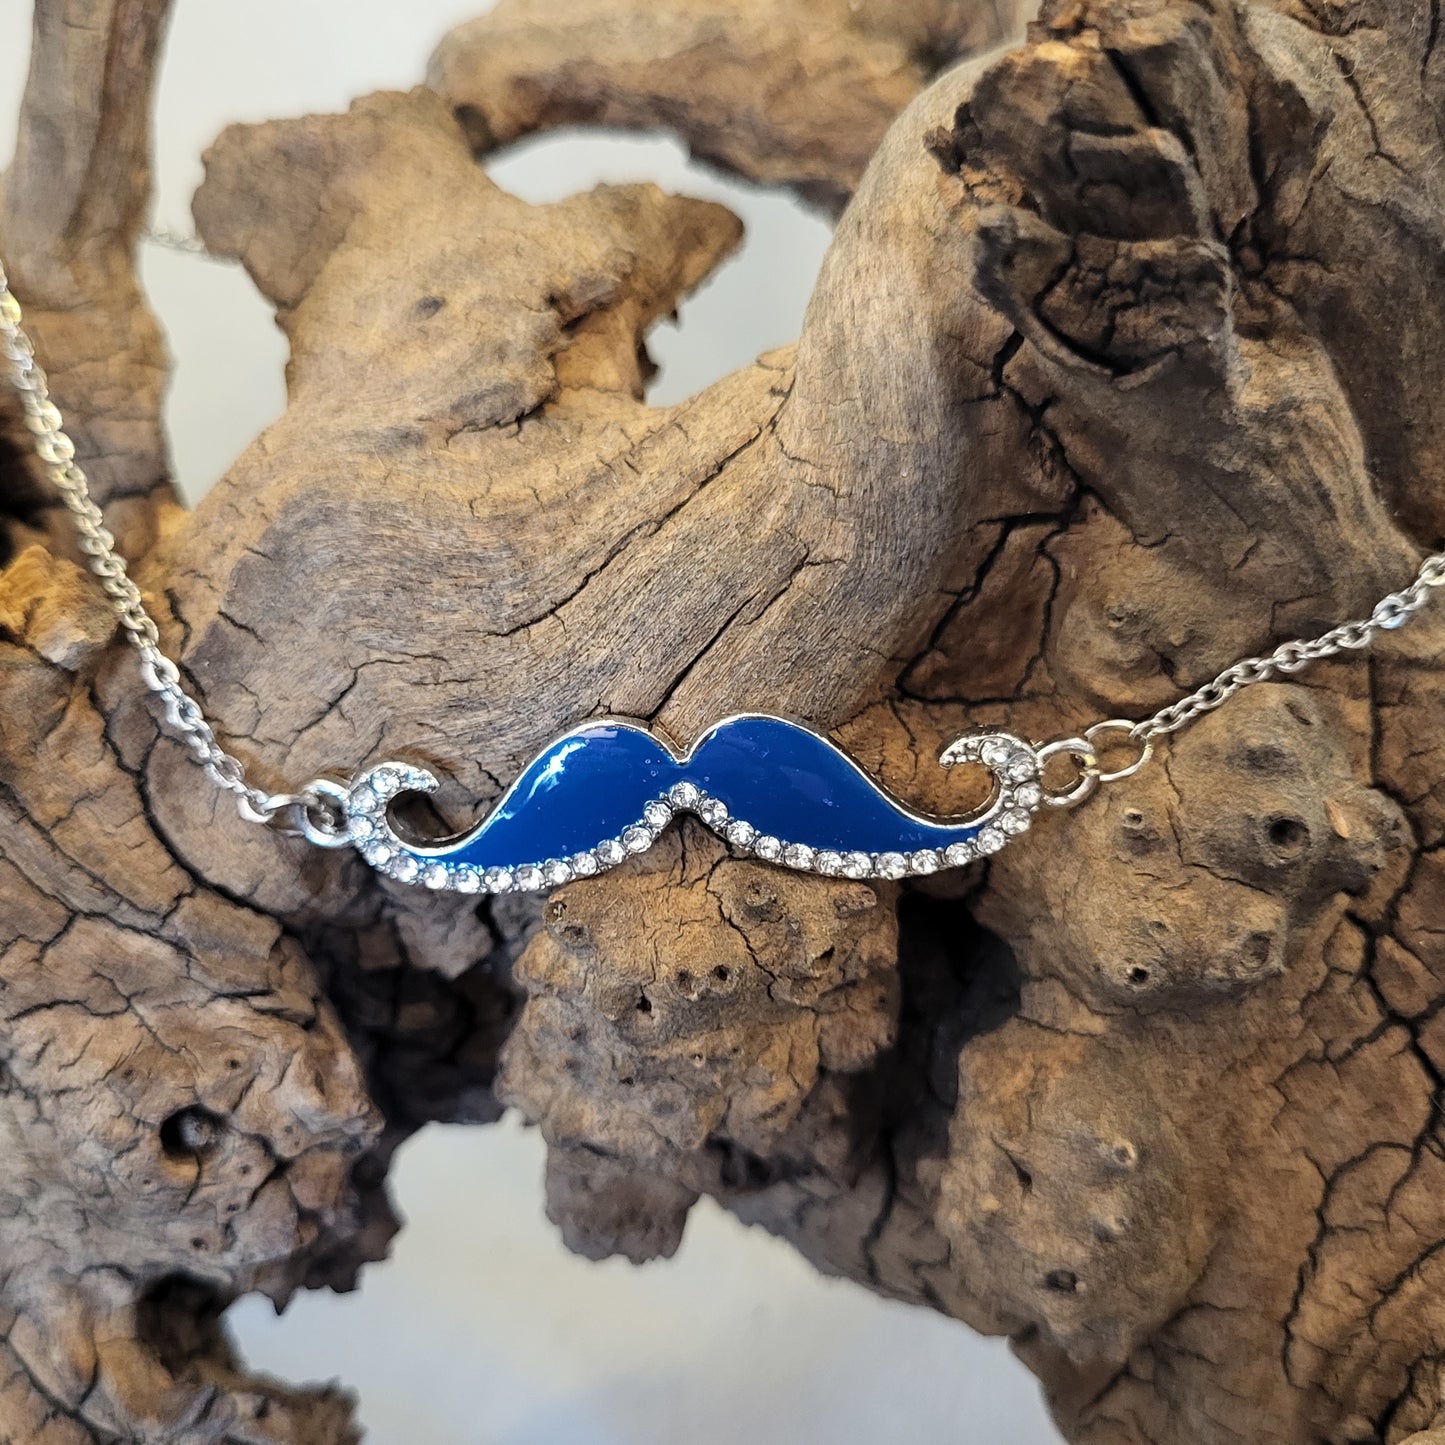 Mustache Necklaces | Jewelry and Accessories